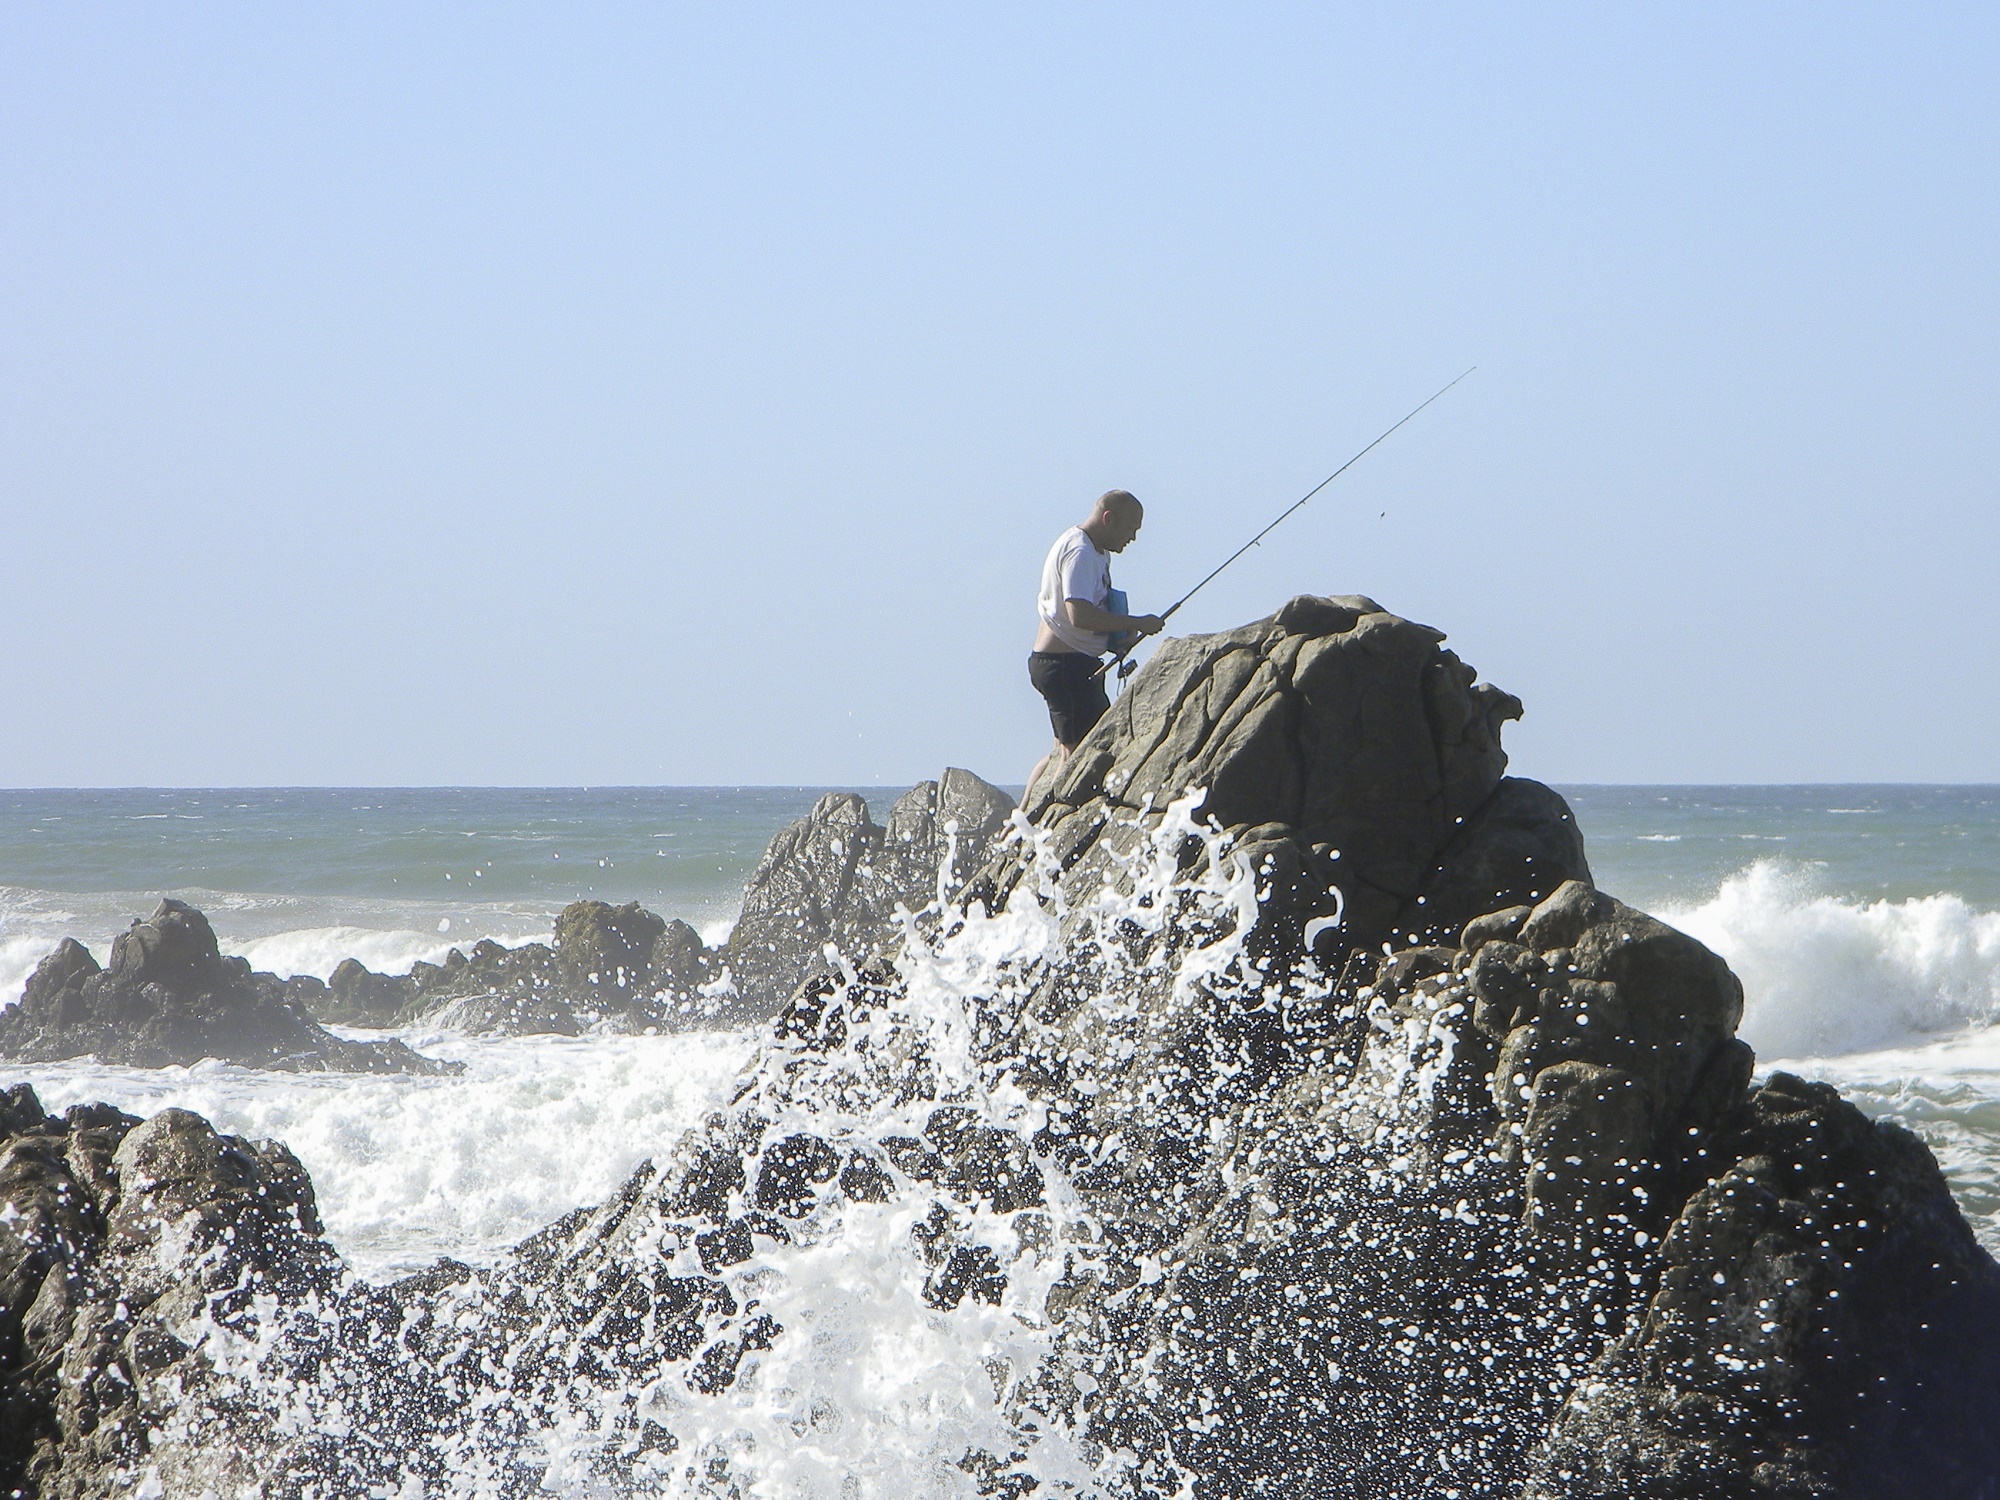 Enjoying the thrill of the breaking waves at high tide. Fishing rocks!